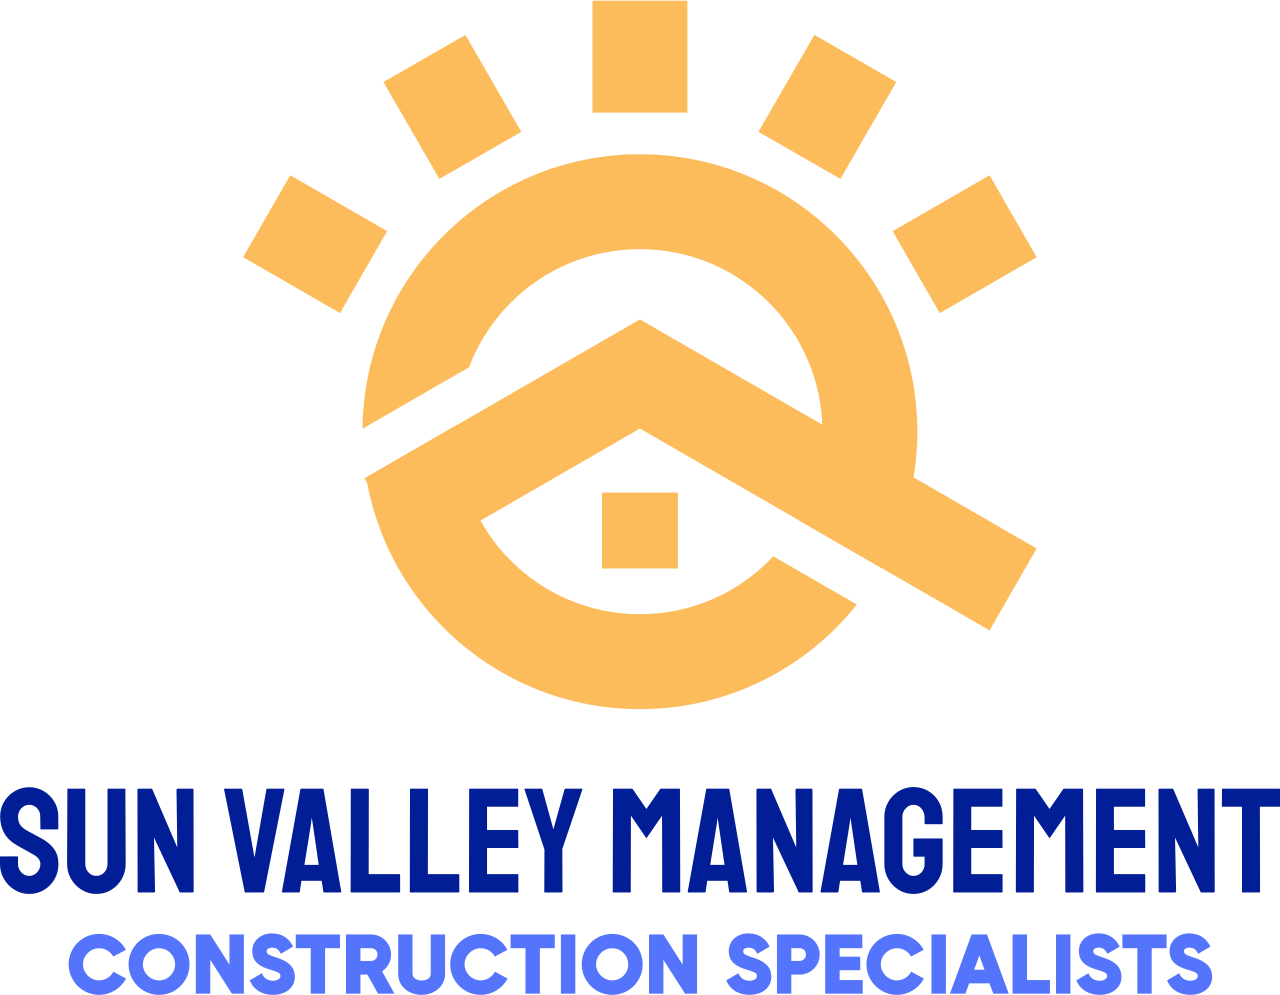 Sun Valley Management's web page